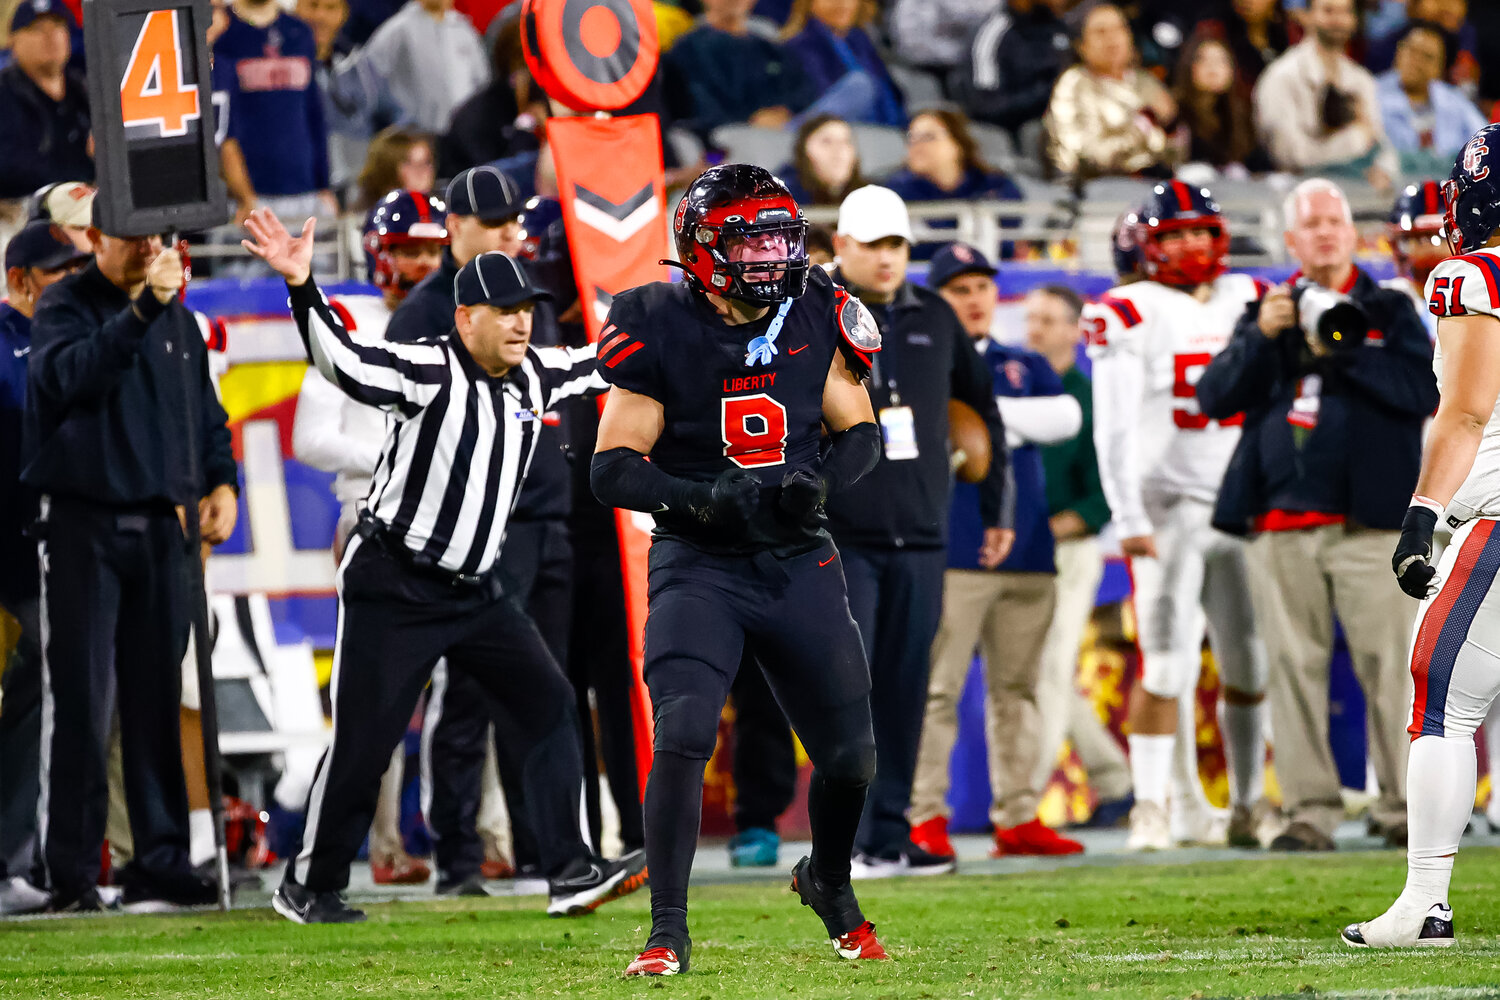 Liberty senior linebacker Keaton Stam (8) reacts after the Lions defense makes a play against Centennial on Saturday night. (Courtesy JJ Digos Photography/For West Valley Preps)